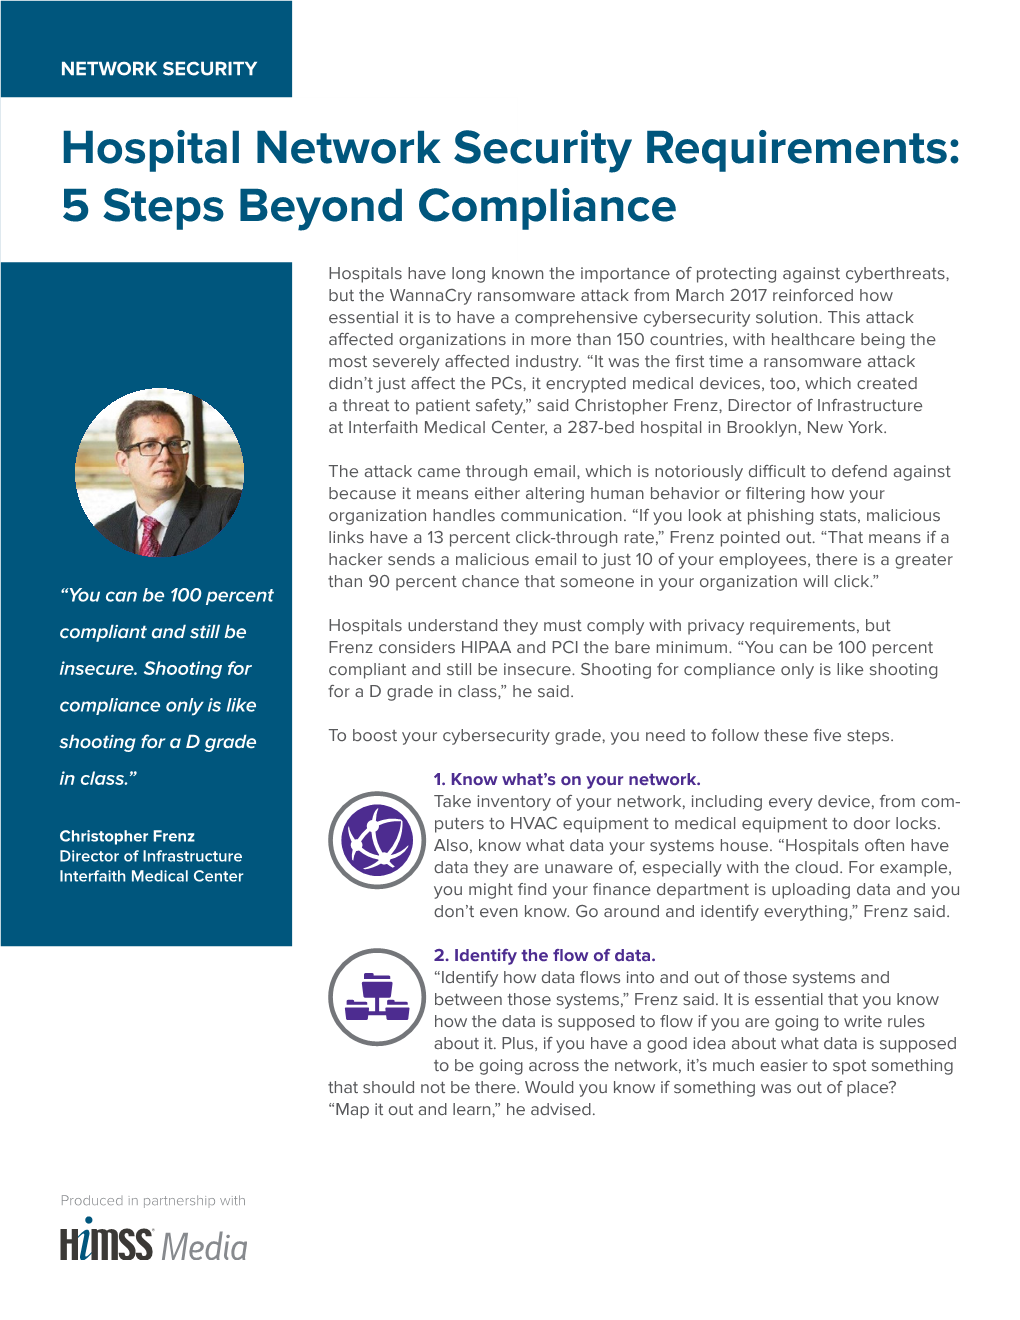 Hospital Network Security Requirements: 5 Steps Beyond Compliance